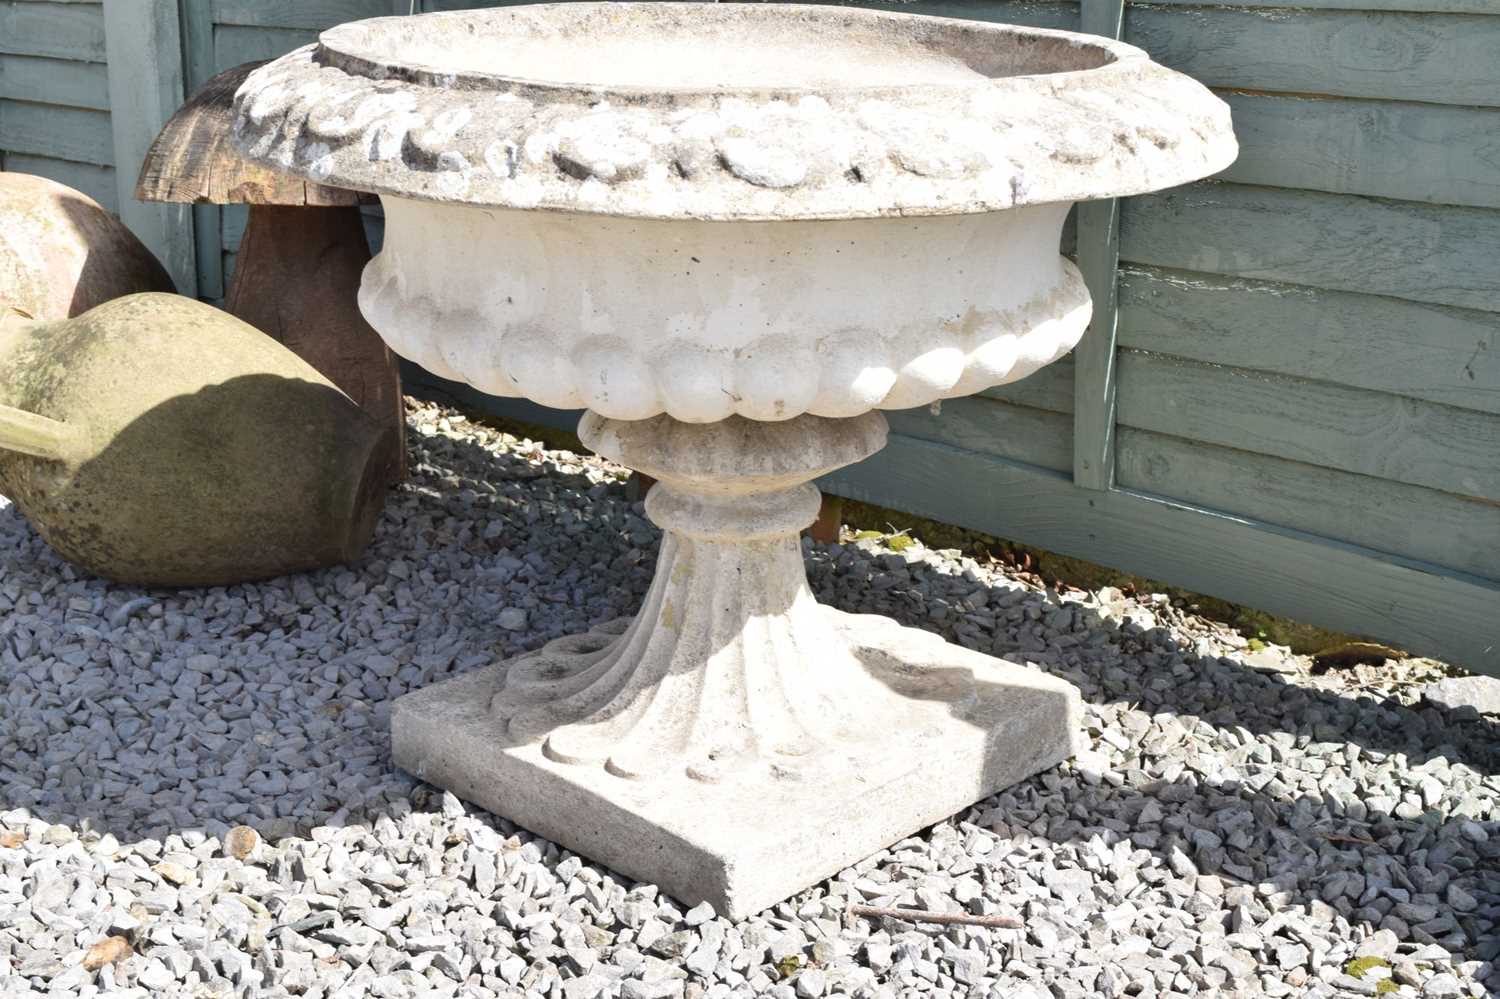 Composition stone low garden urn / planter - Image 5 of 5